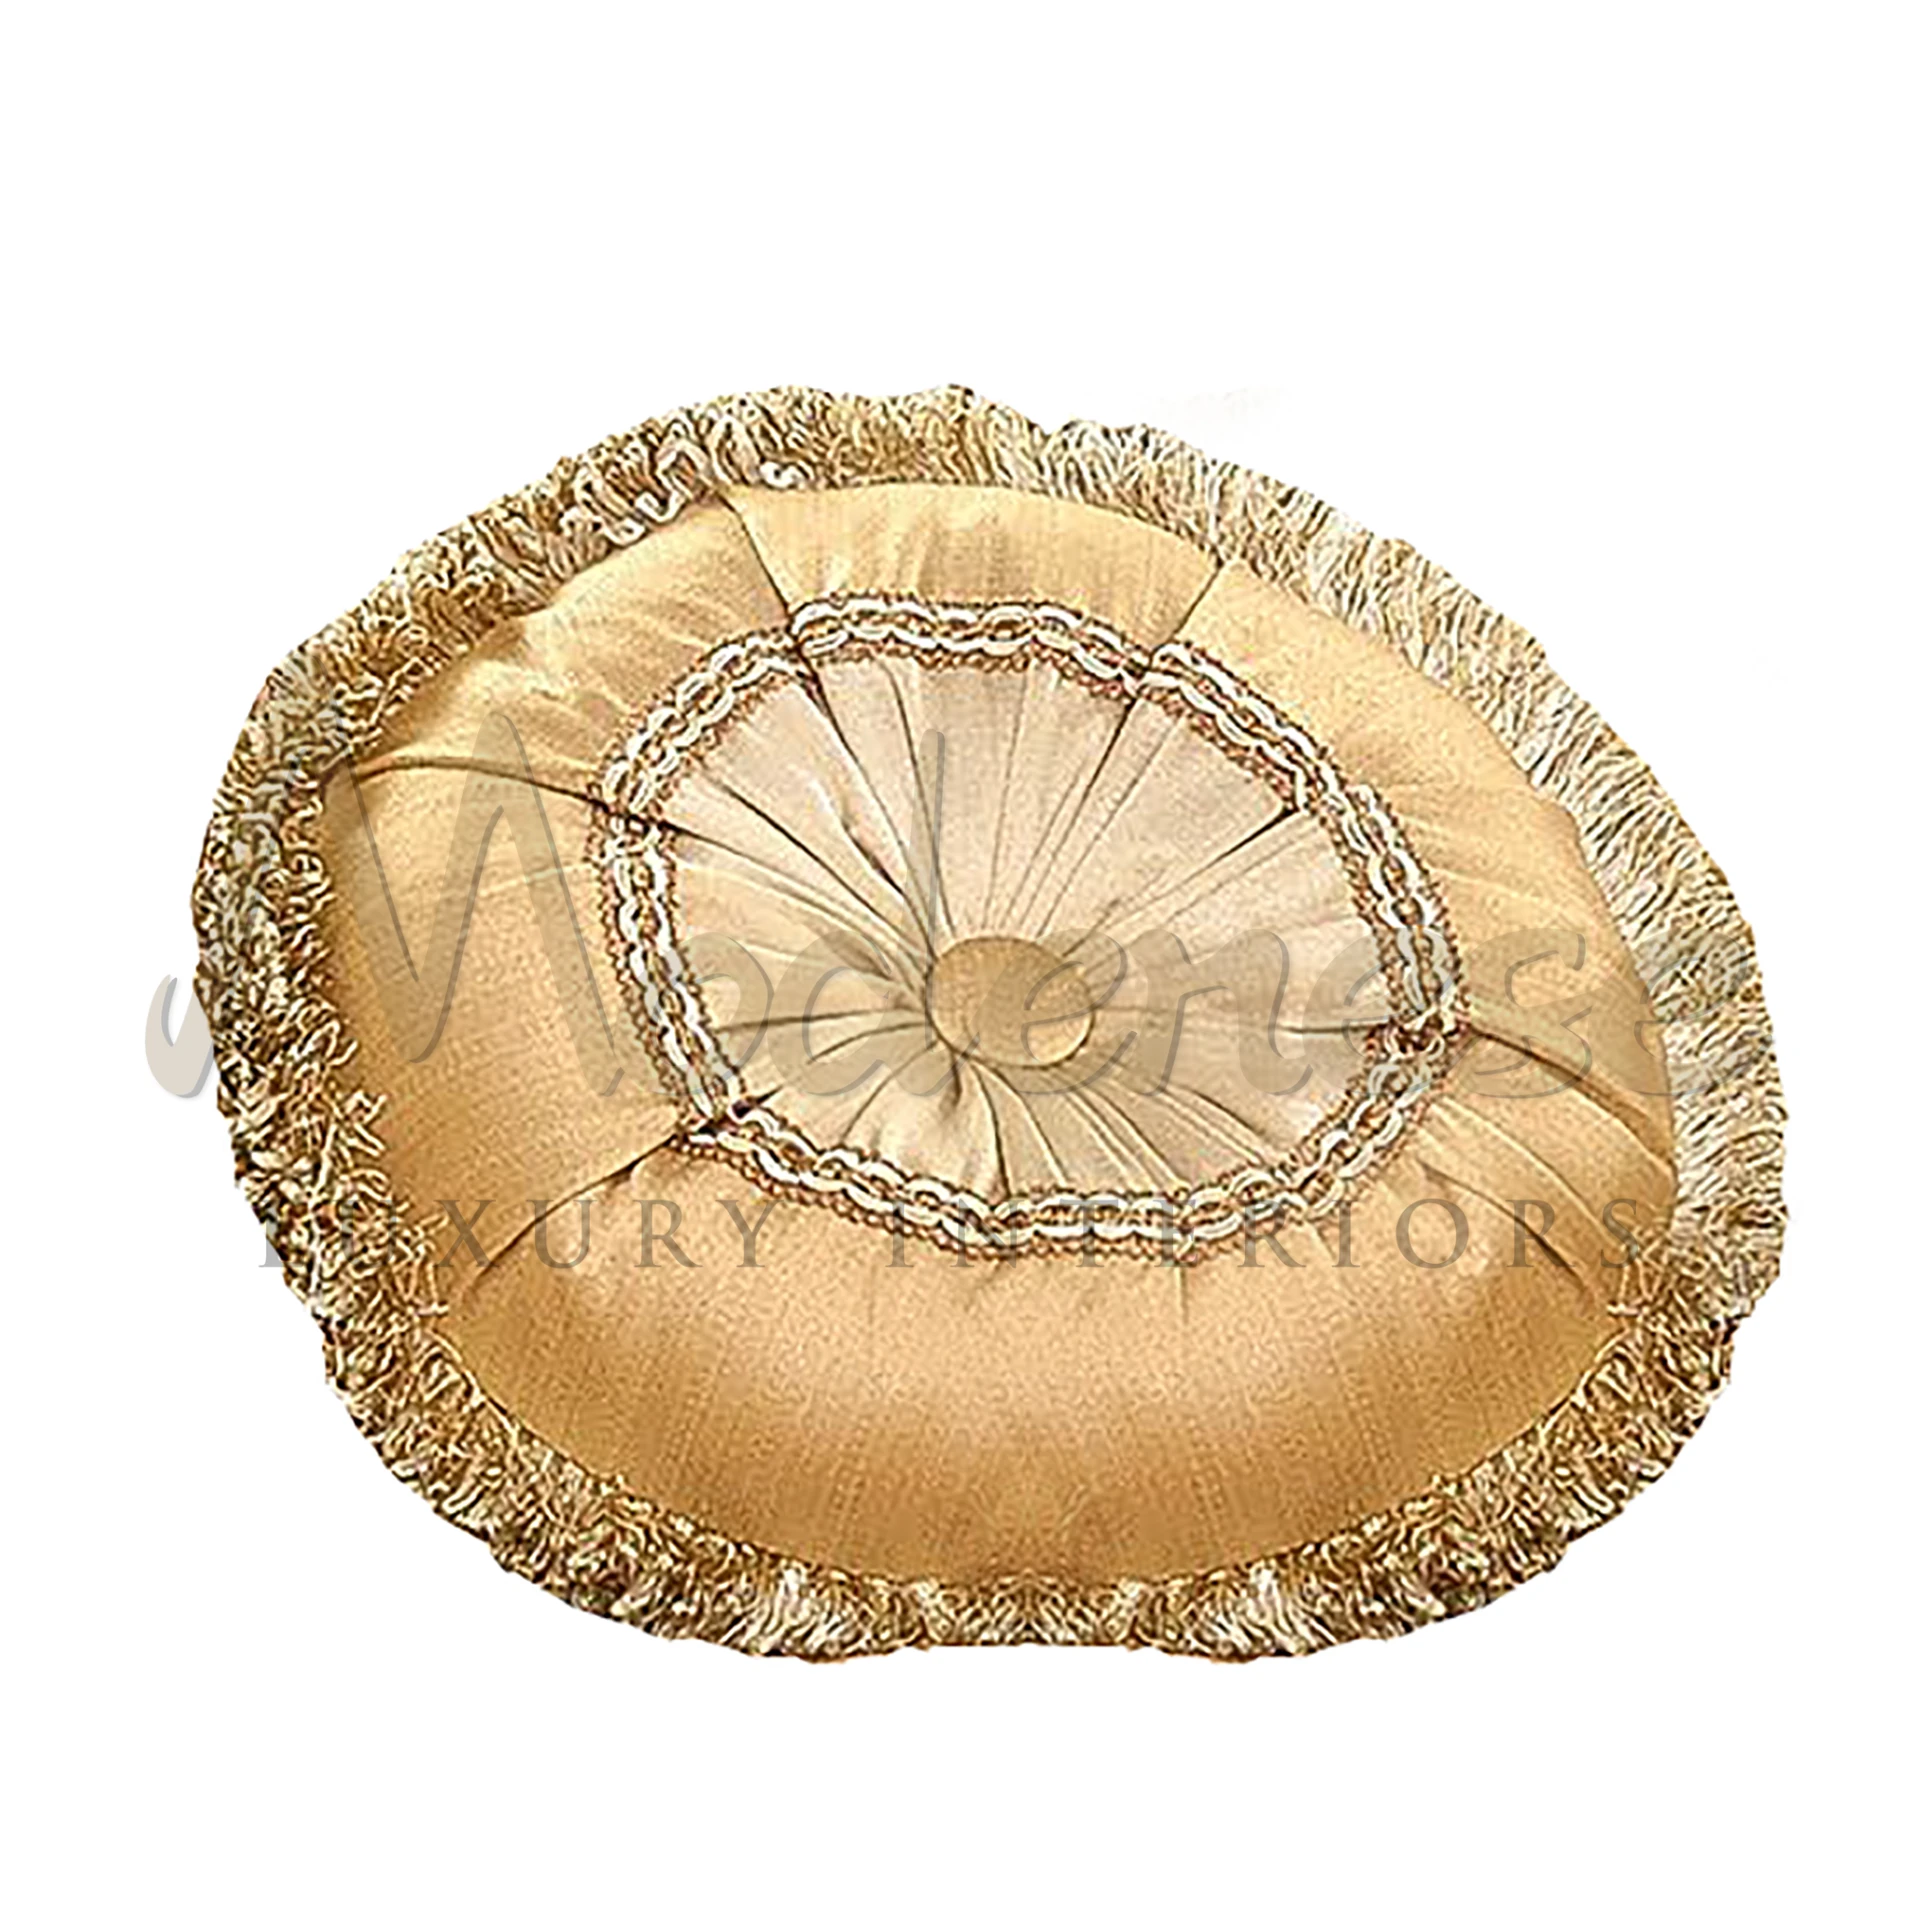 Elegant Italian Pillow: A symbol of refined luxury, handcrafted to enhance home decor with its sophisticated elegance.